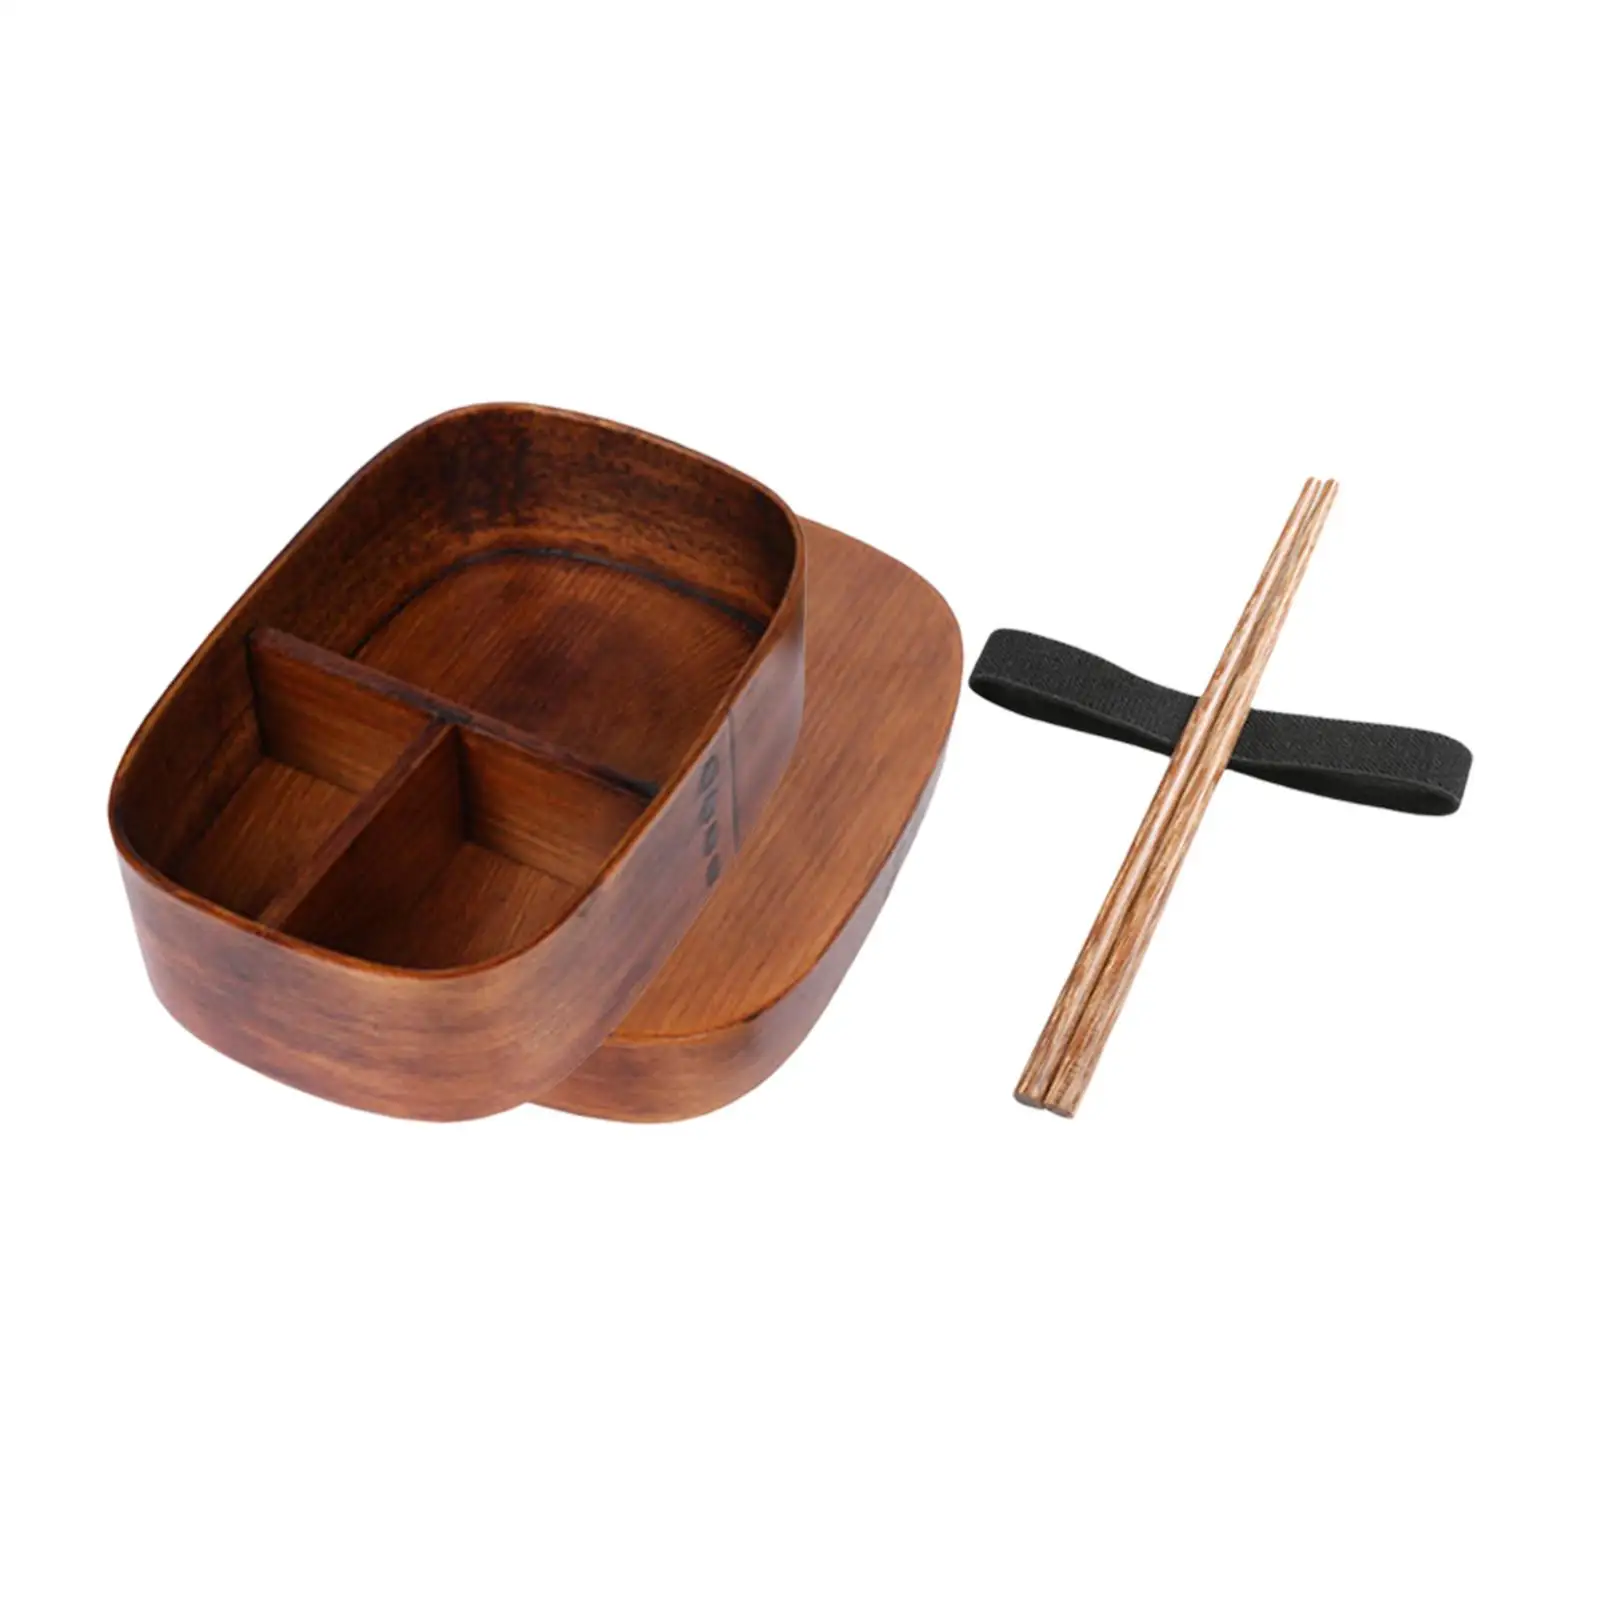 Japanese Style Wooden Lunch Box with Chopsticks, Traditional Food Container